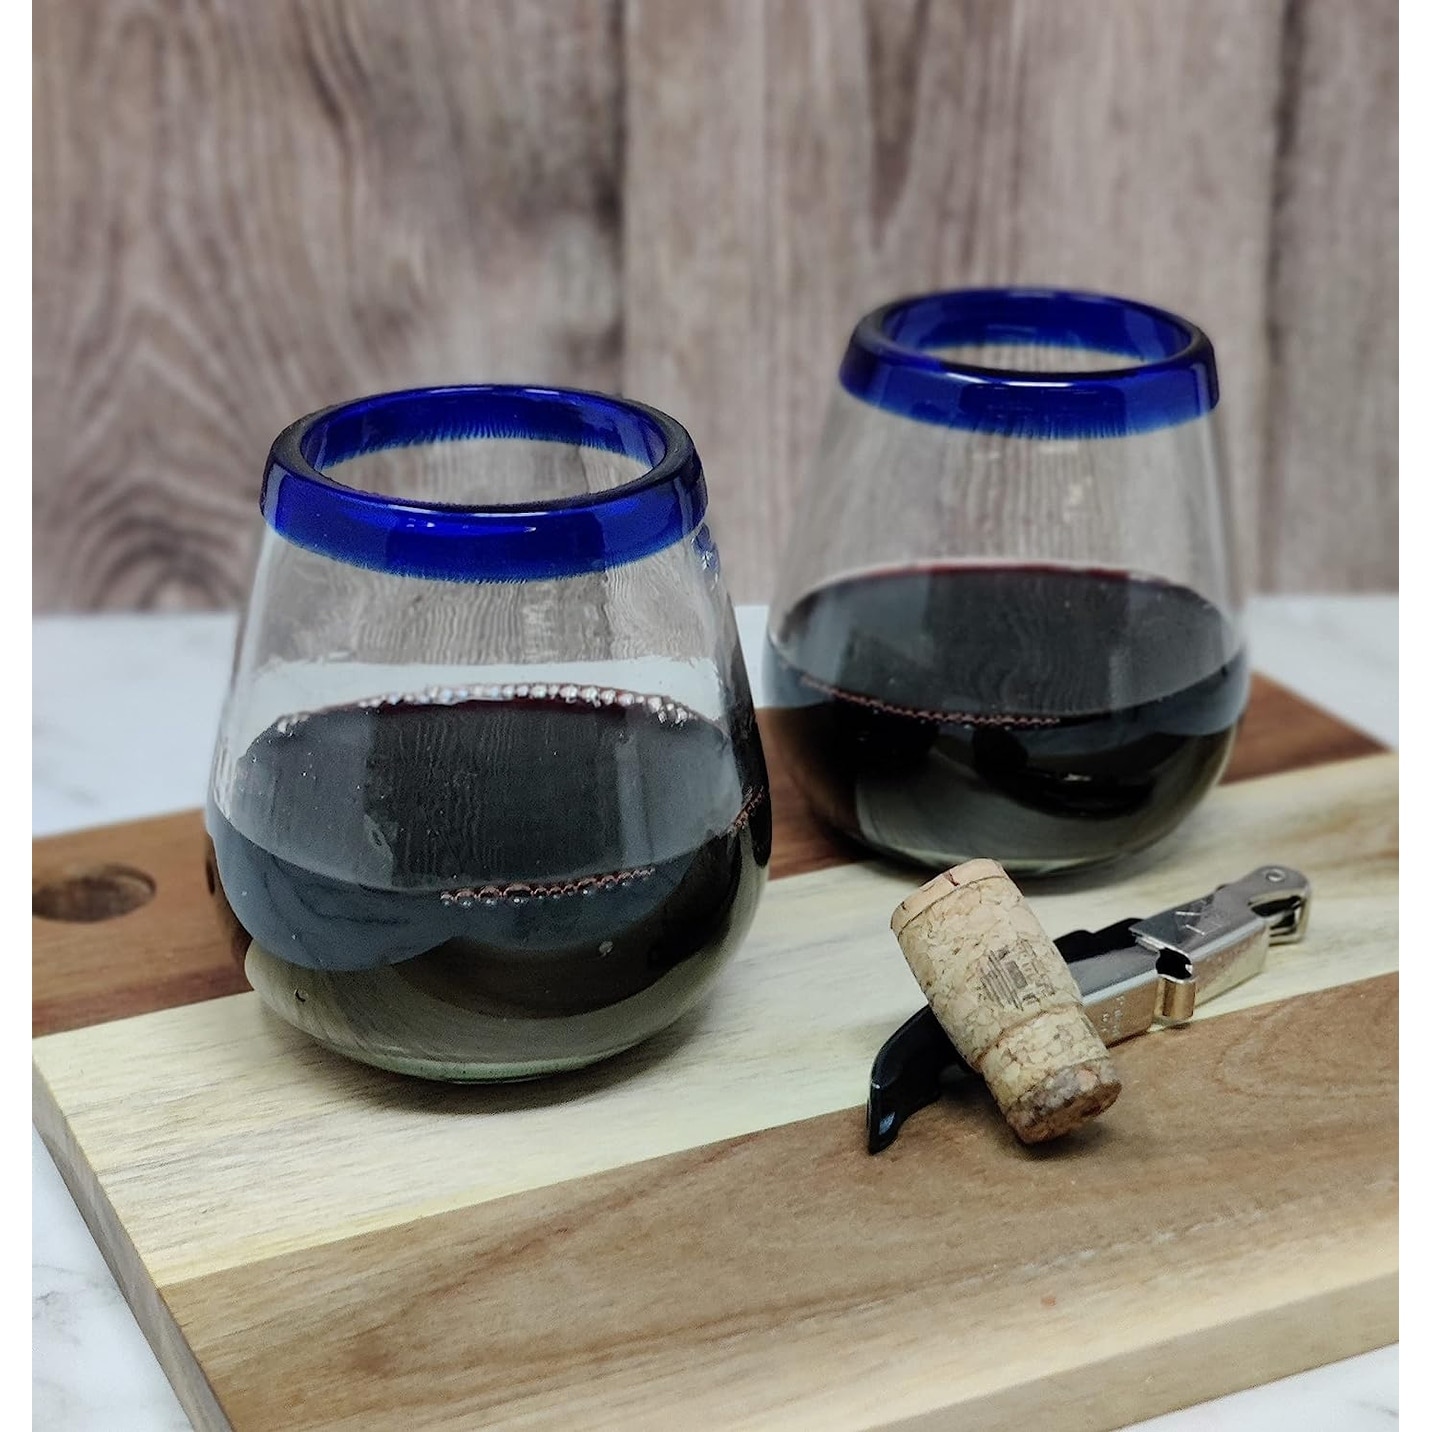 https://ak1.ostkcdn.com/images/products/is/images/direct/57cabfb8c62a9a62e0d2445e0eff316ec8baef52/Hand-Blown-Mexican-Stemless-Wine-Glasses---Set-of-6-Glasses-with-Cobalt-Blue-Rims-%2815-oz%29.jpg